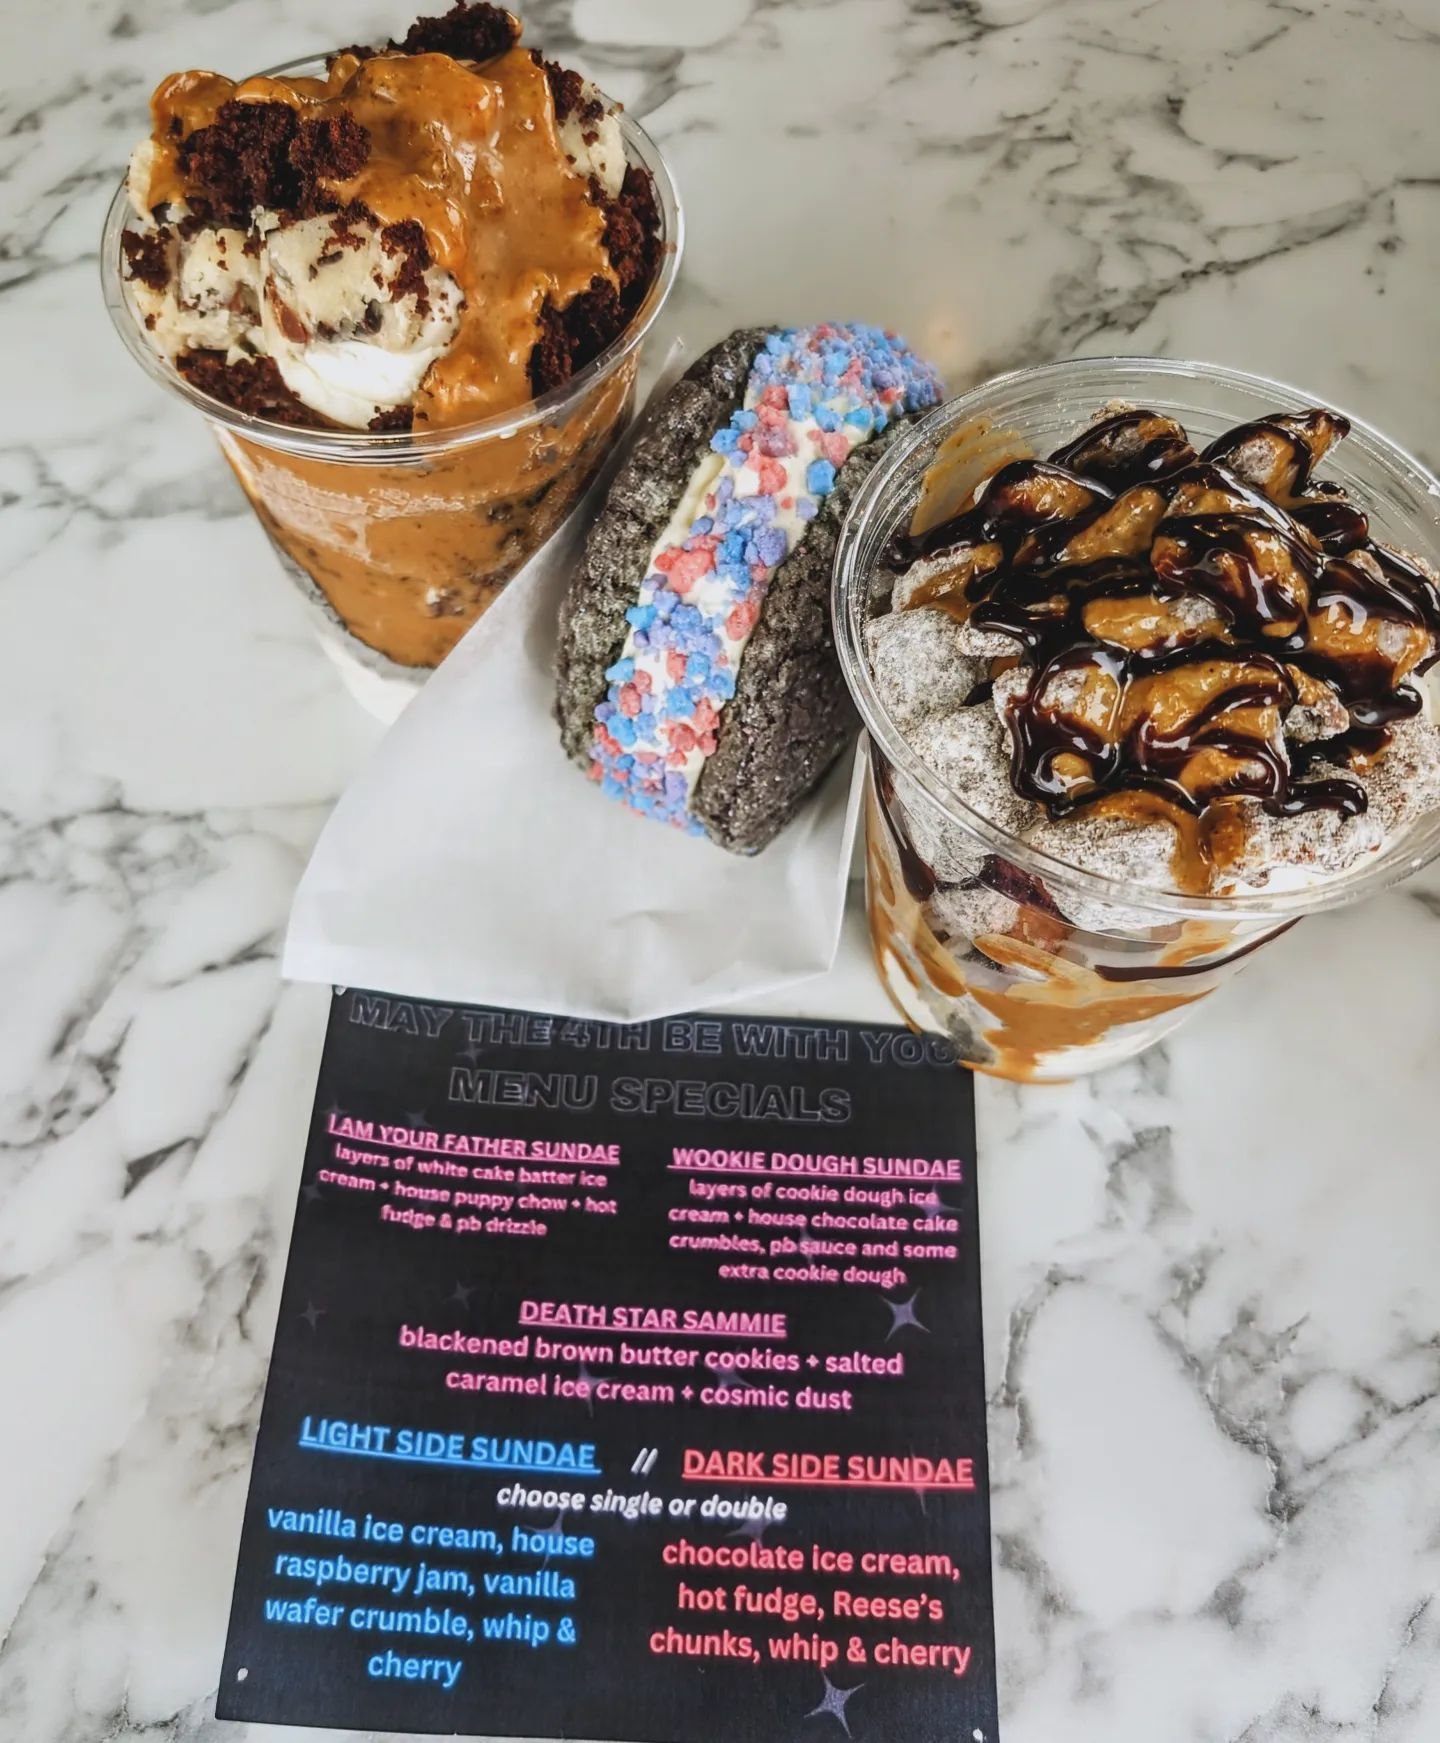 You know we weren't going to miss the chance to lean into a theme...
May the 4th Be With You menu is kicking off today!! So much peanut butter, so little time.

I AM YOUR FATHER SUNDAE
&bull; layers of white cake batter ice cream + house puppy chow +